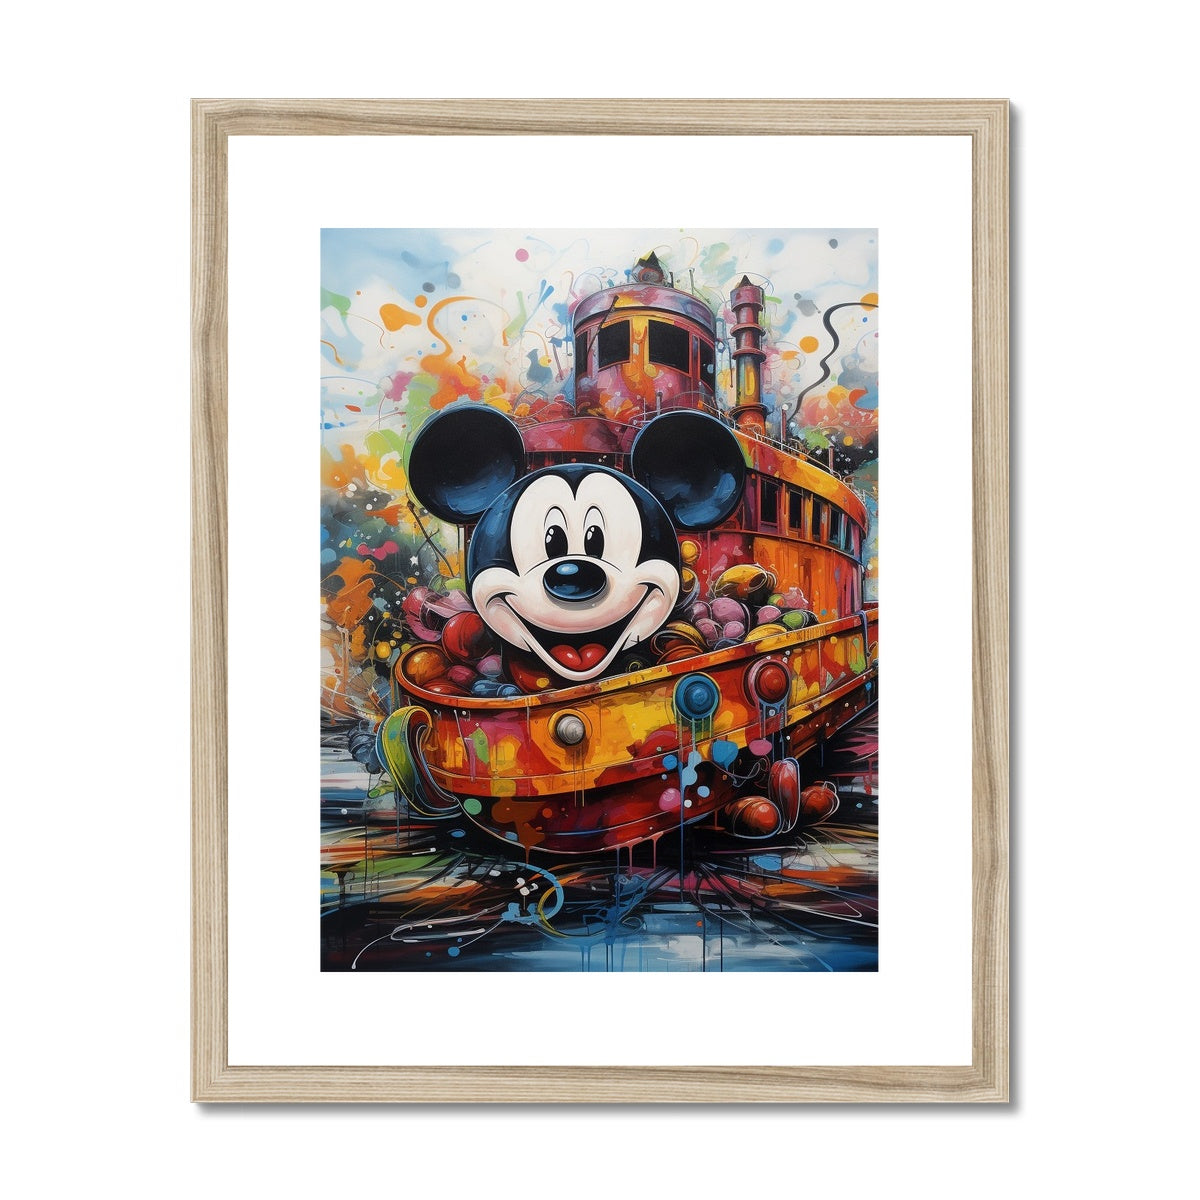 Steamboat Willie Framed & Mounted Print